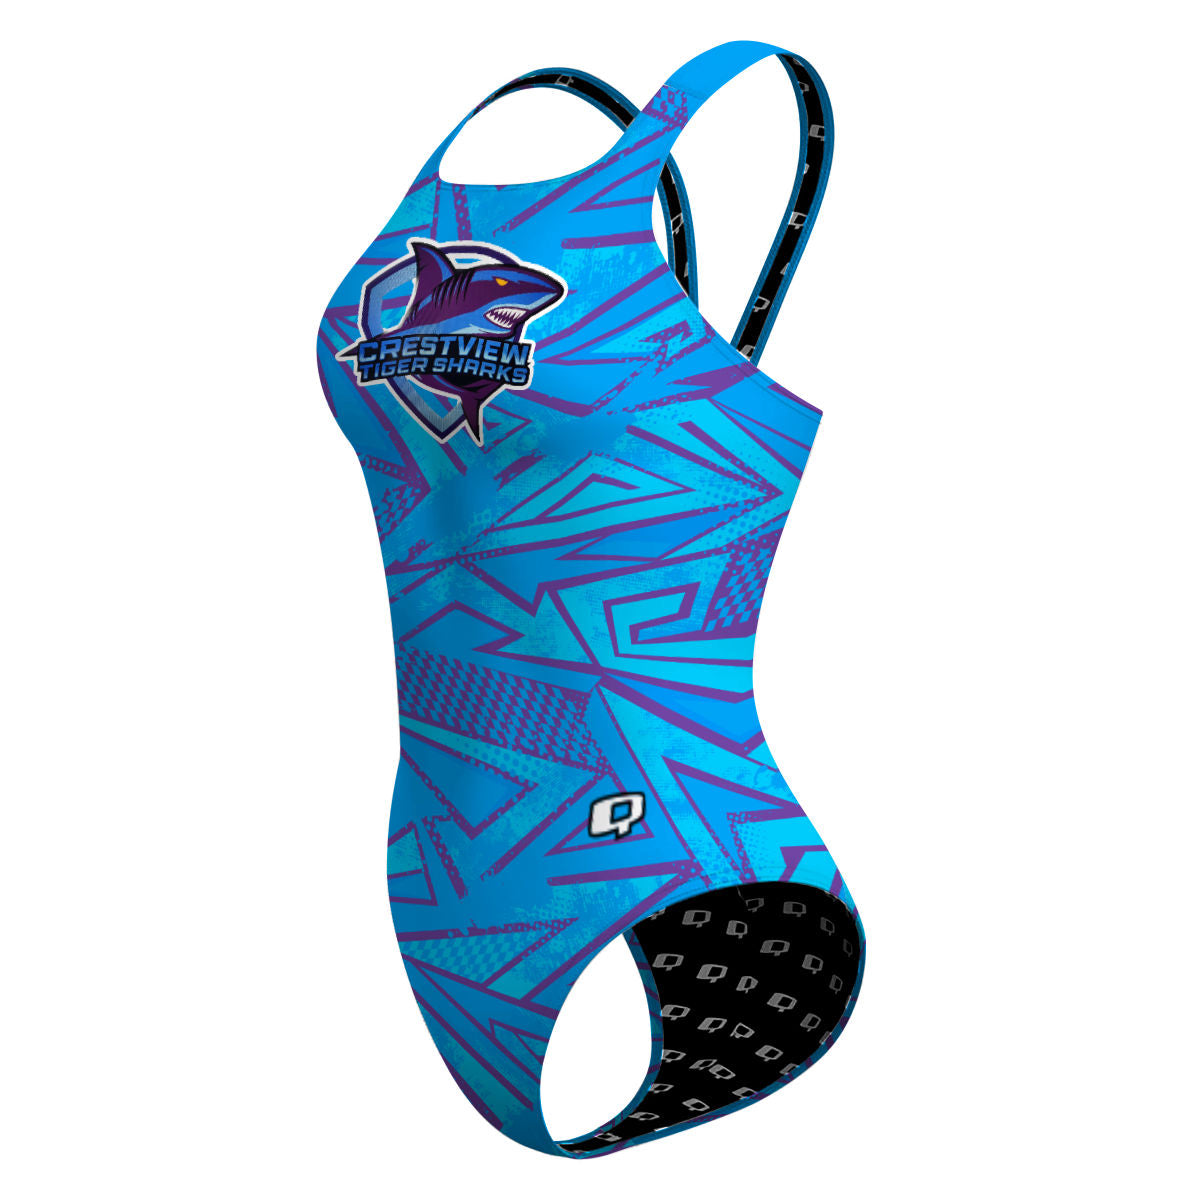 Crestview Tiger Sharks 2 - Classic Strap Swimsuit